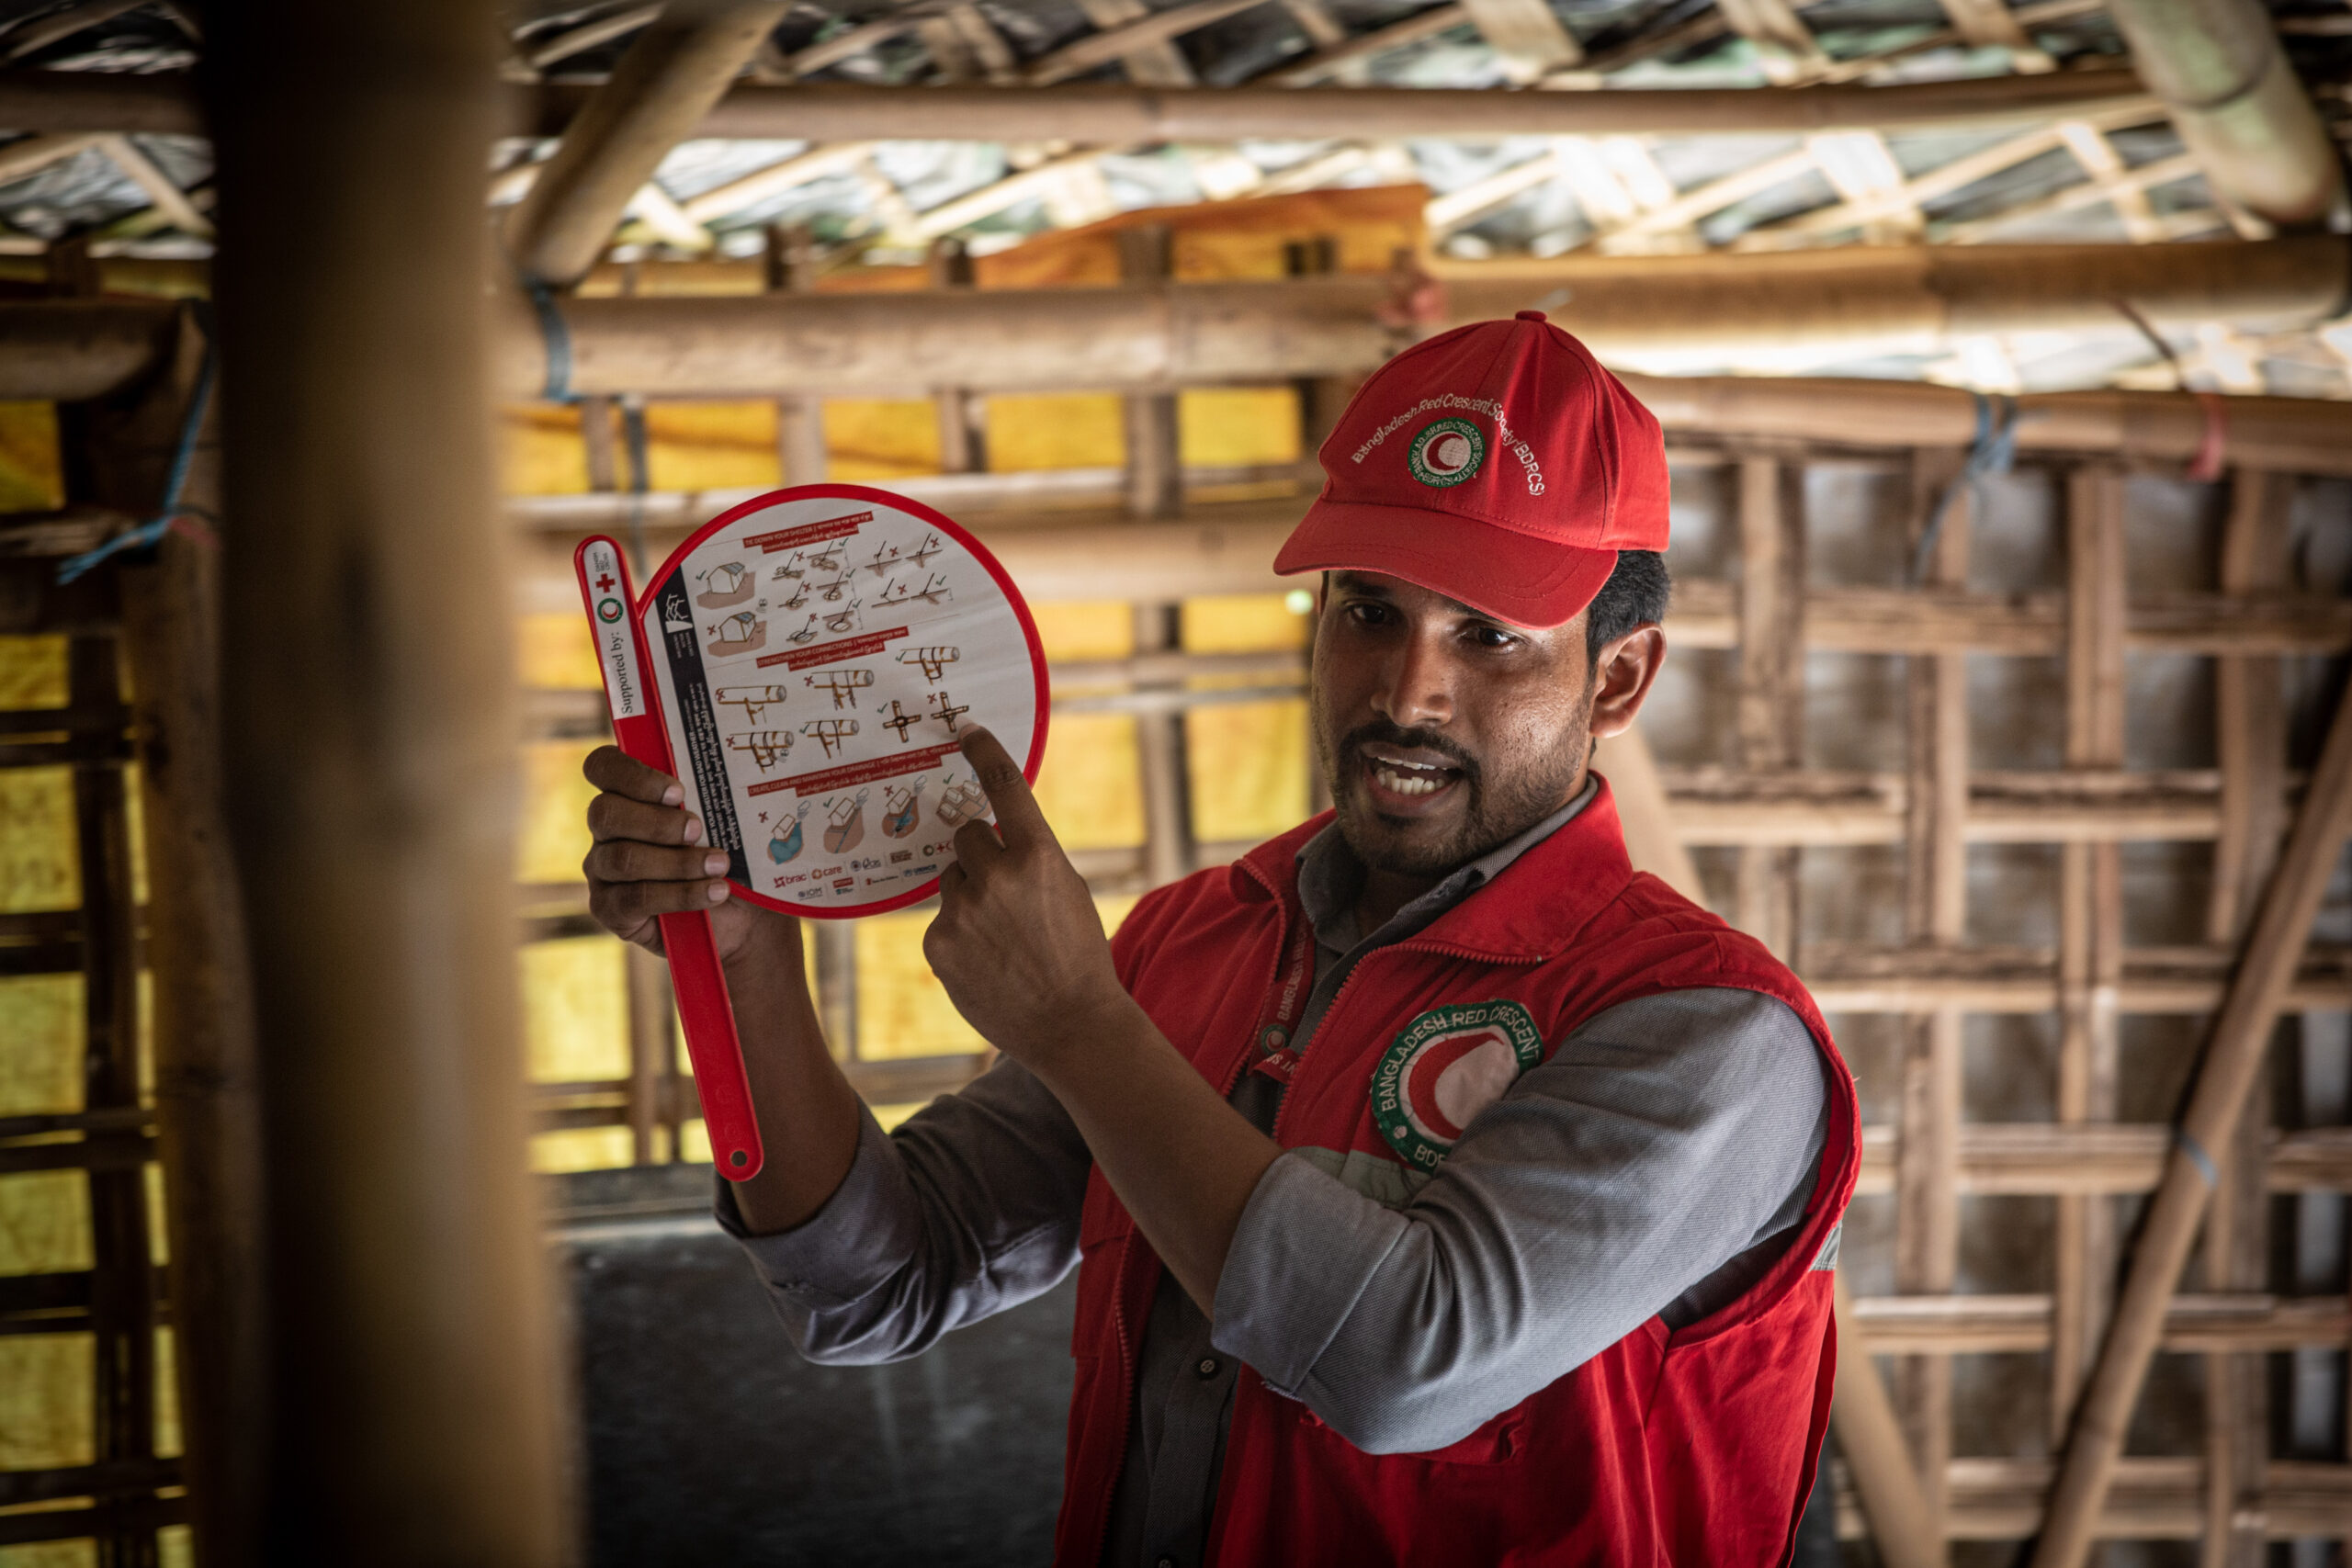 A Red Crescent volunteer holds a sign with illustrated instructions demonstrating how to secure shelters ahead of monsoon rains or cyclones.